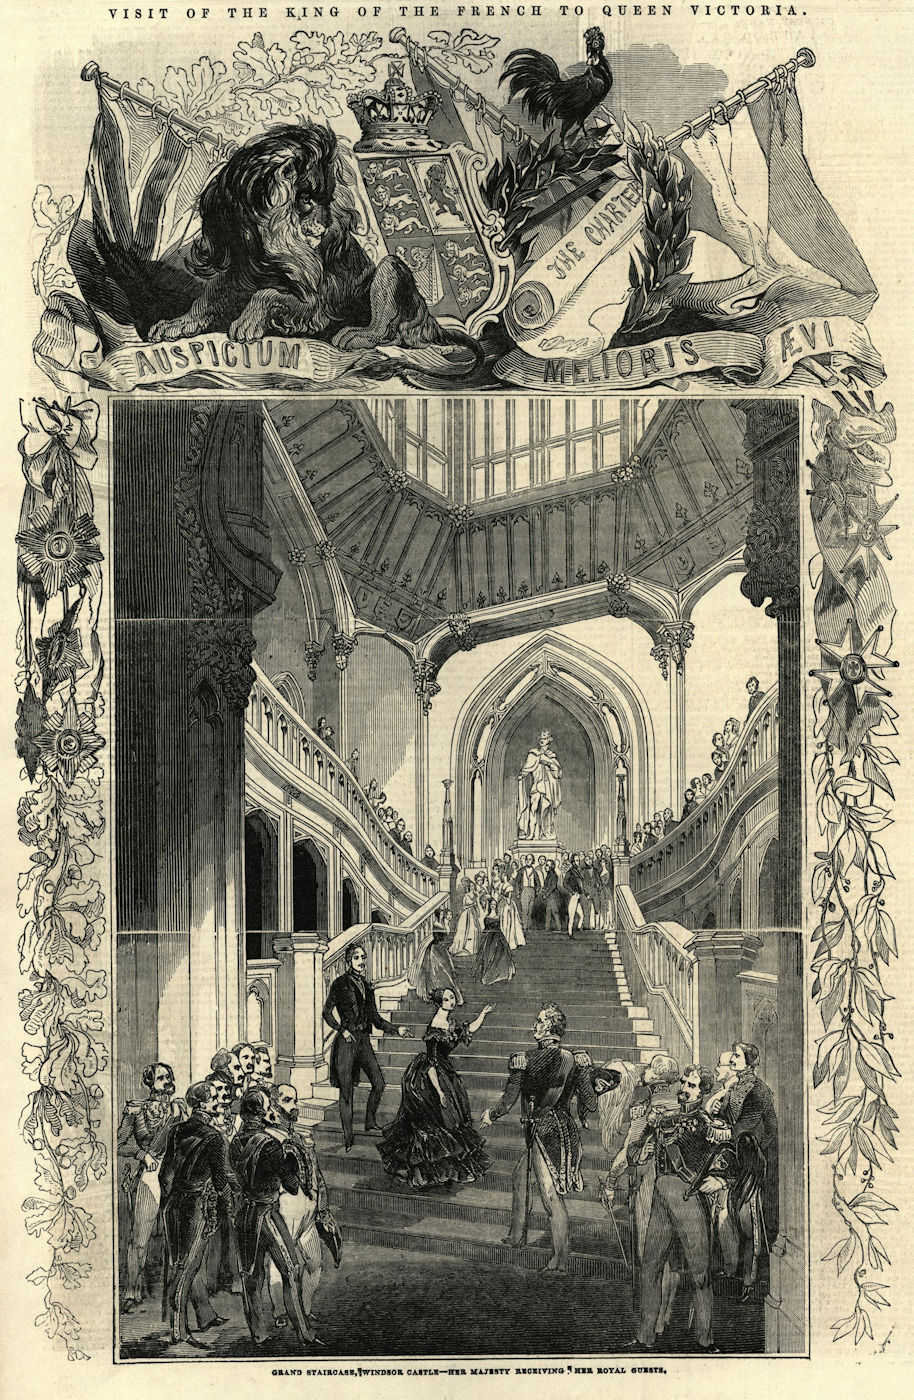 Associate Product King of France visit to Queen Victoria. Grand staircase, Windsor Castle 1844